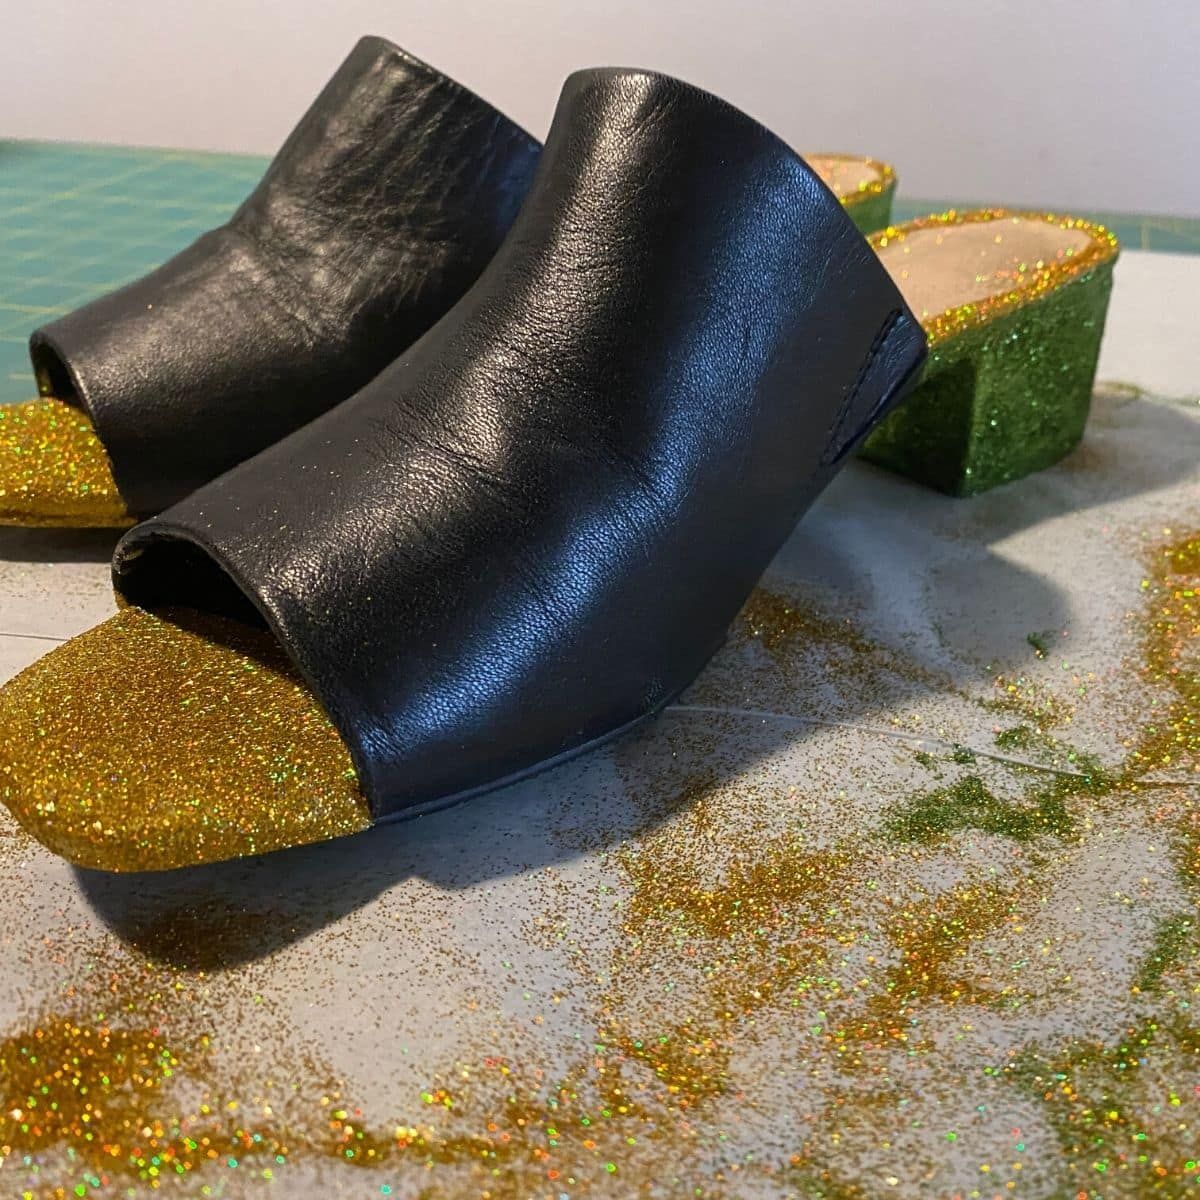 Black damaged shoes repaired with mod podge and glitter